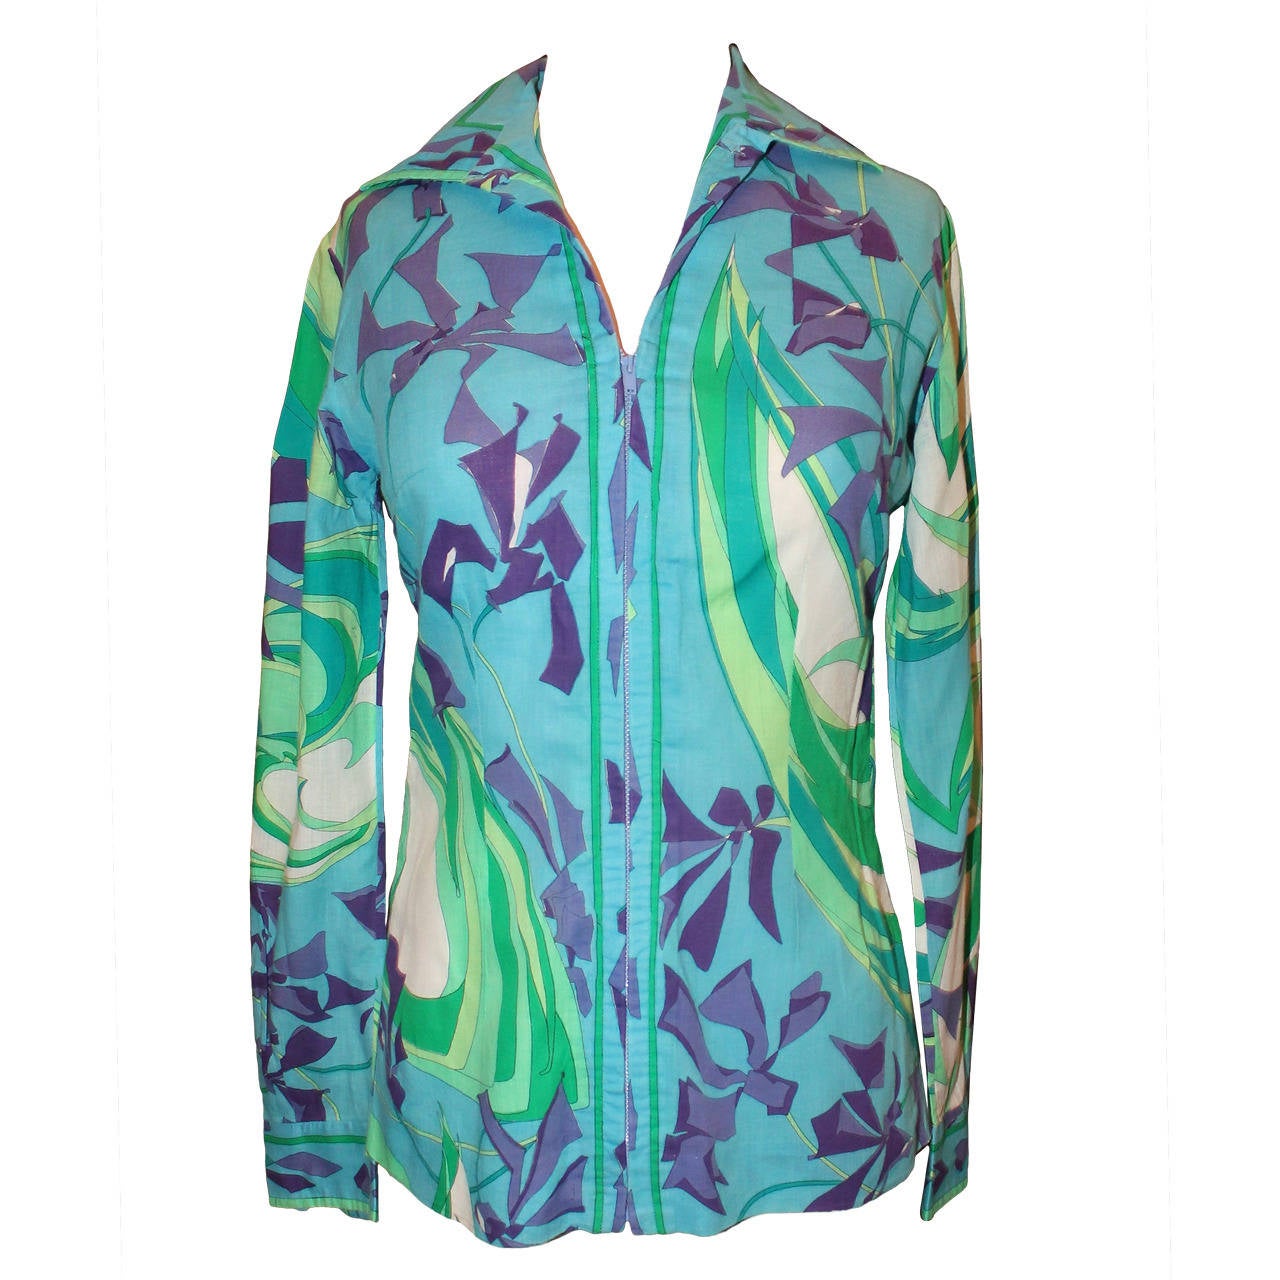 Pucci Vintage Teal Floral Print Jacket/Shirt - circa 1960s - S For Sale